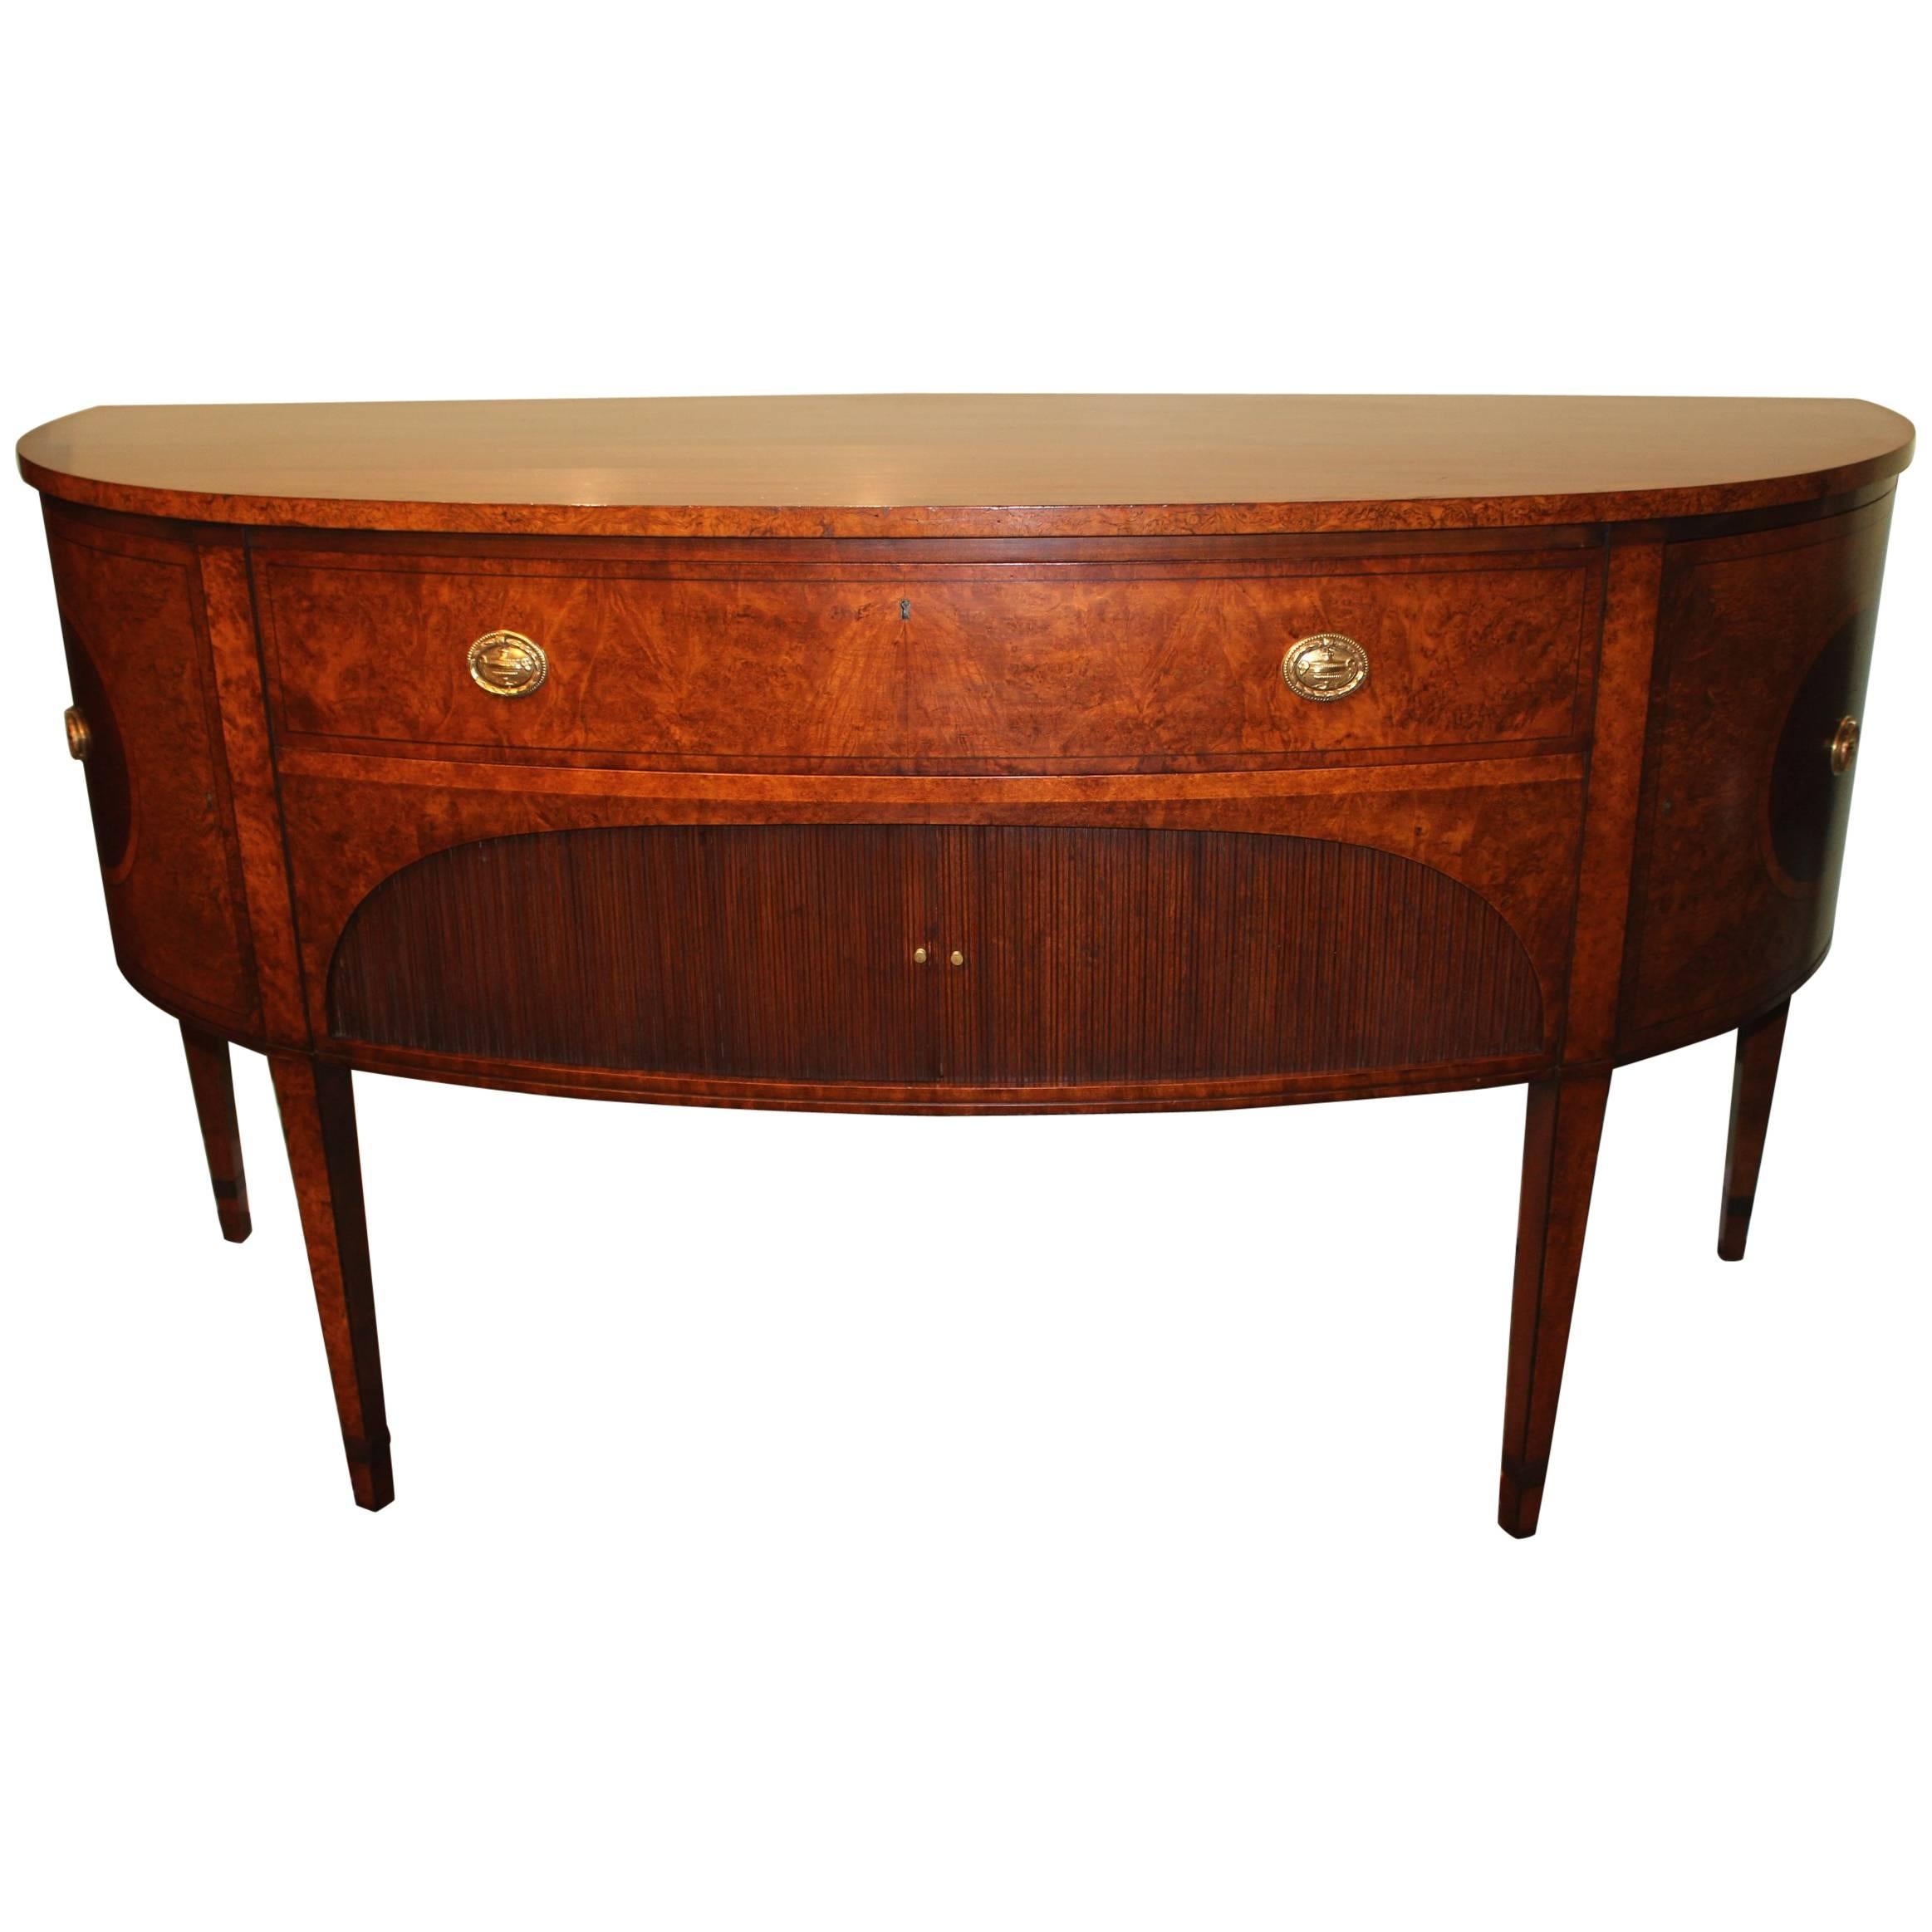 Demilune Mahogany Sideboard or Server with Burled Walnut and Tambour Doors